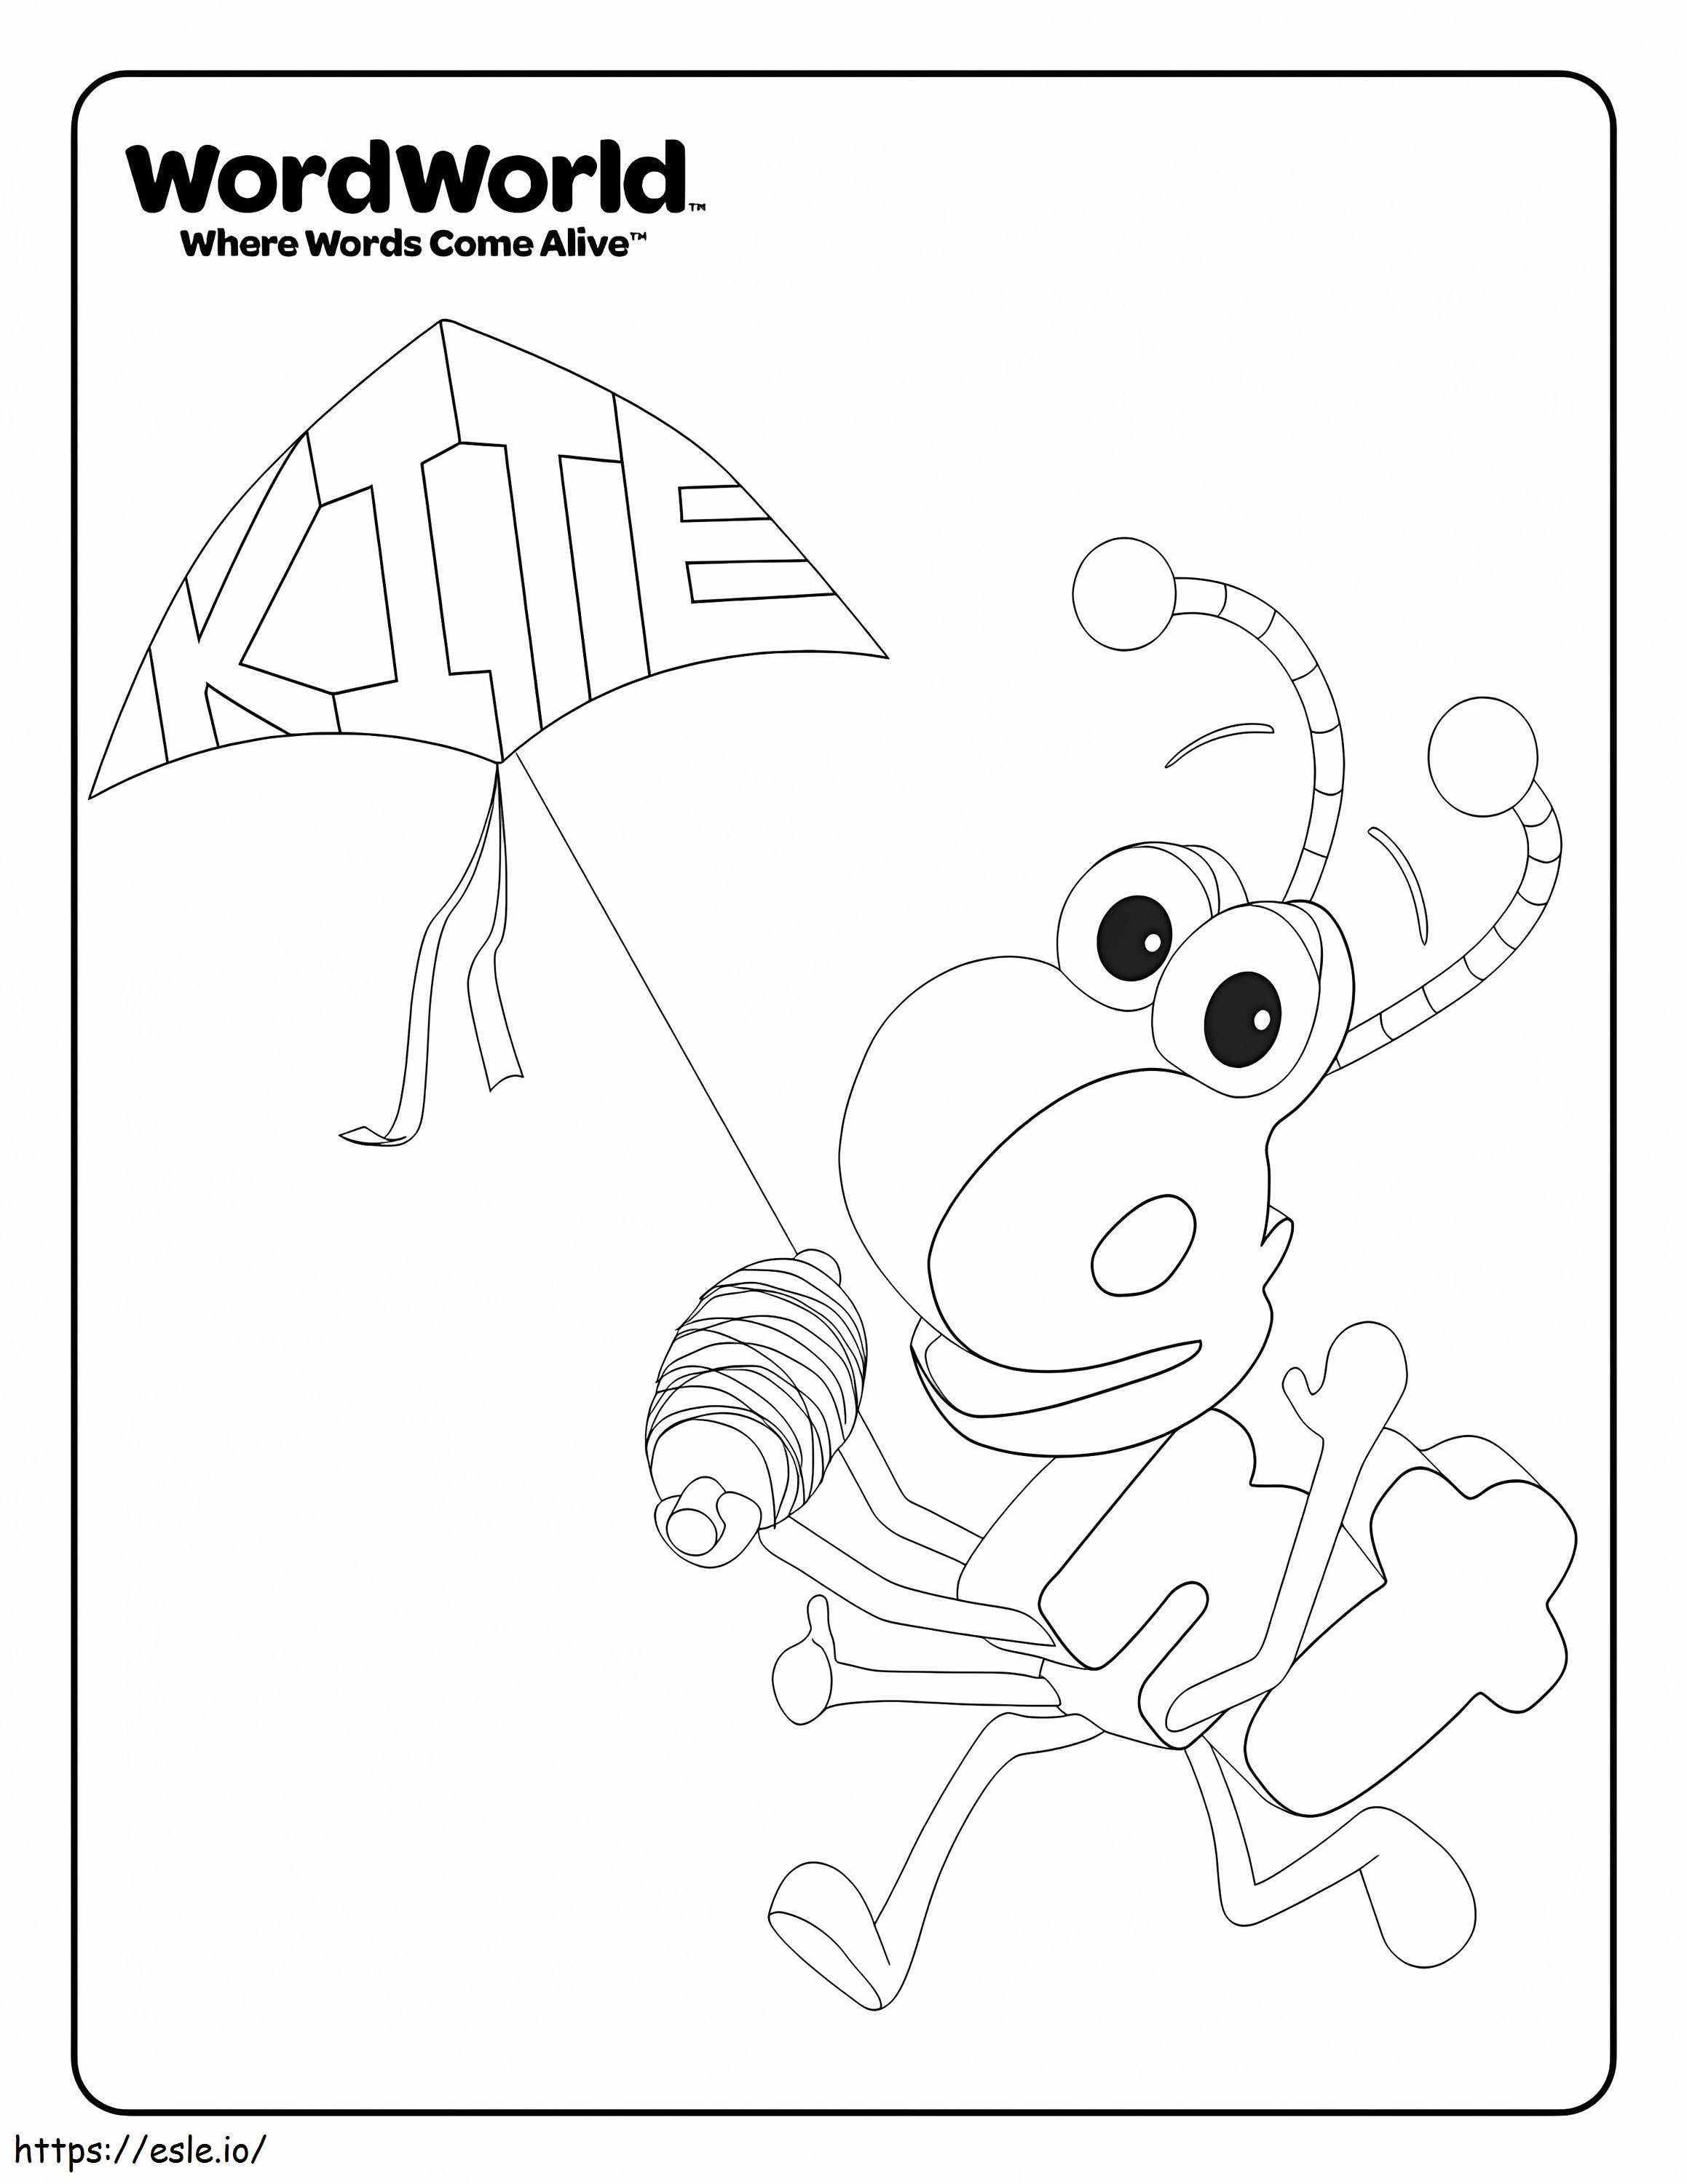 Ant WordWorld Coloring Page coloring page